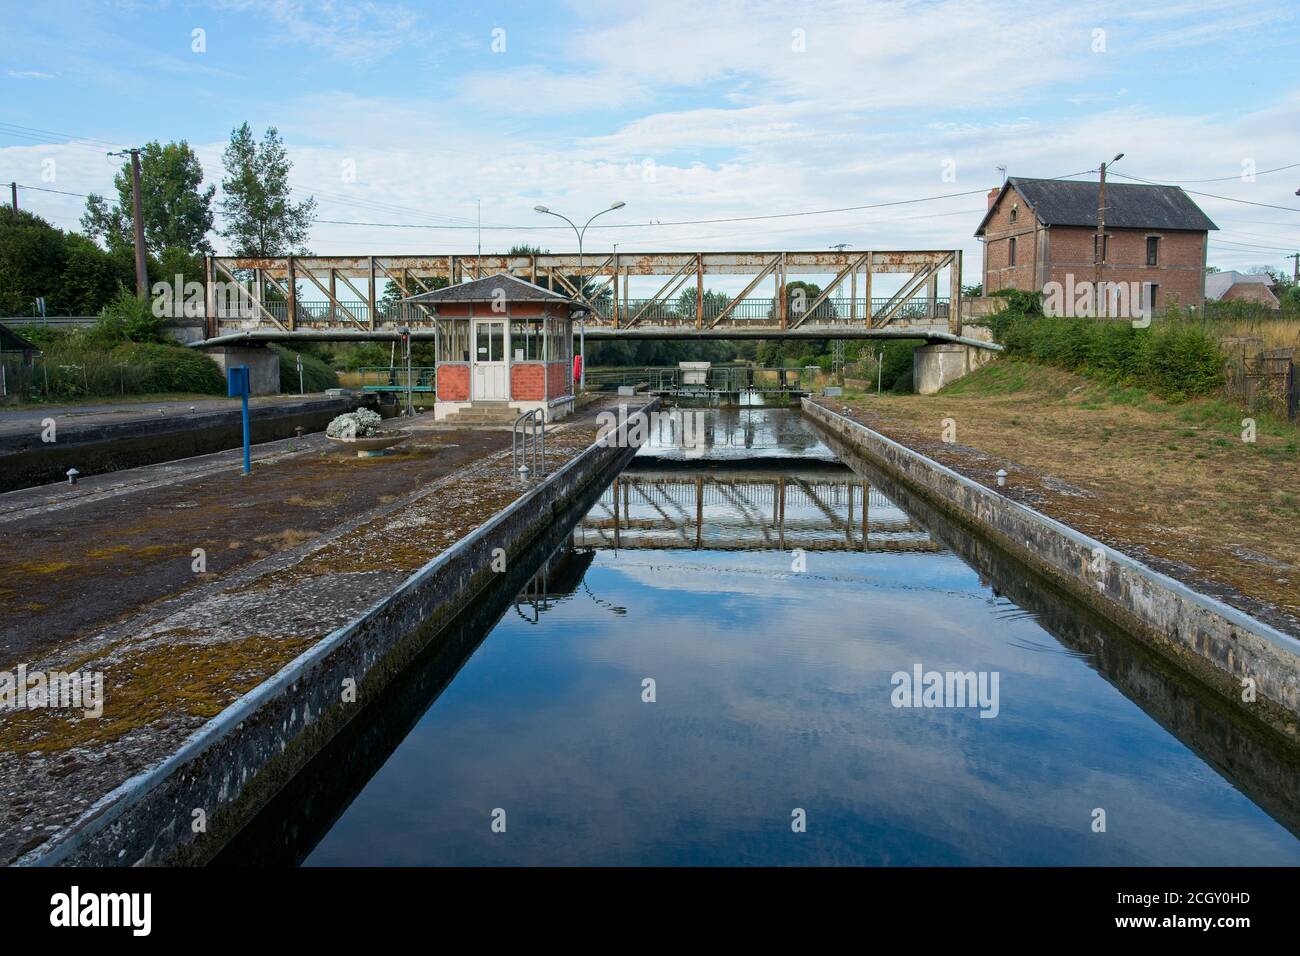 Fontaine-les-Clercs France - 27 July 2020 - Locks in Canal de St Quentin in France Stock Photo